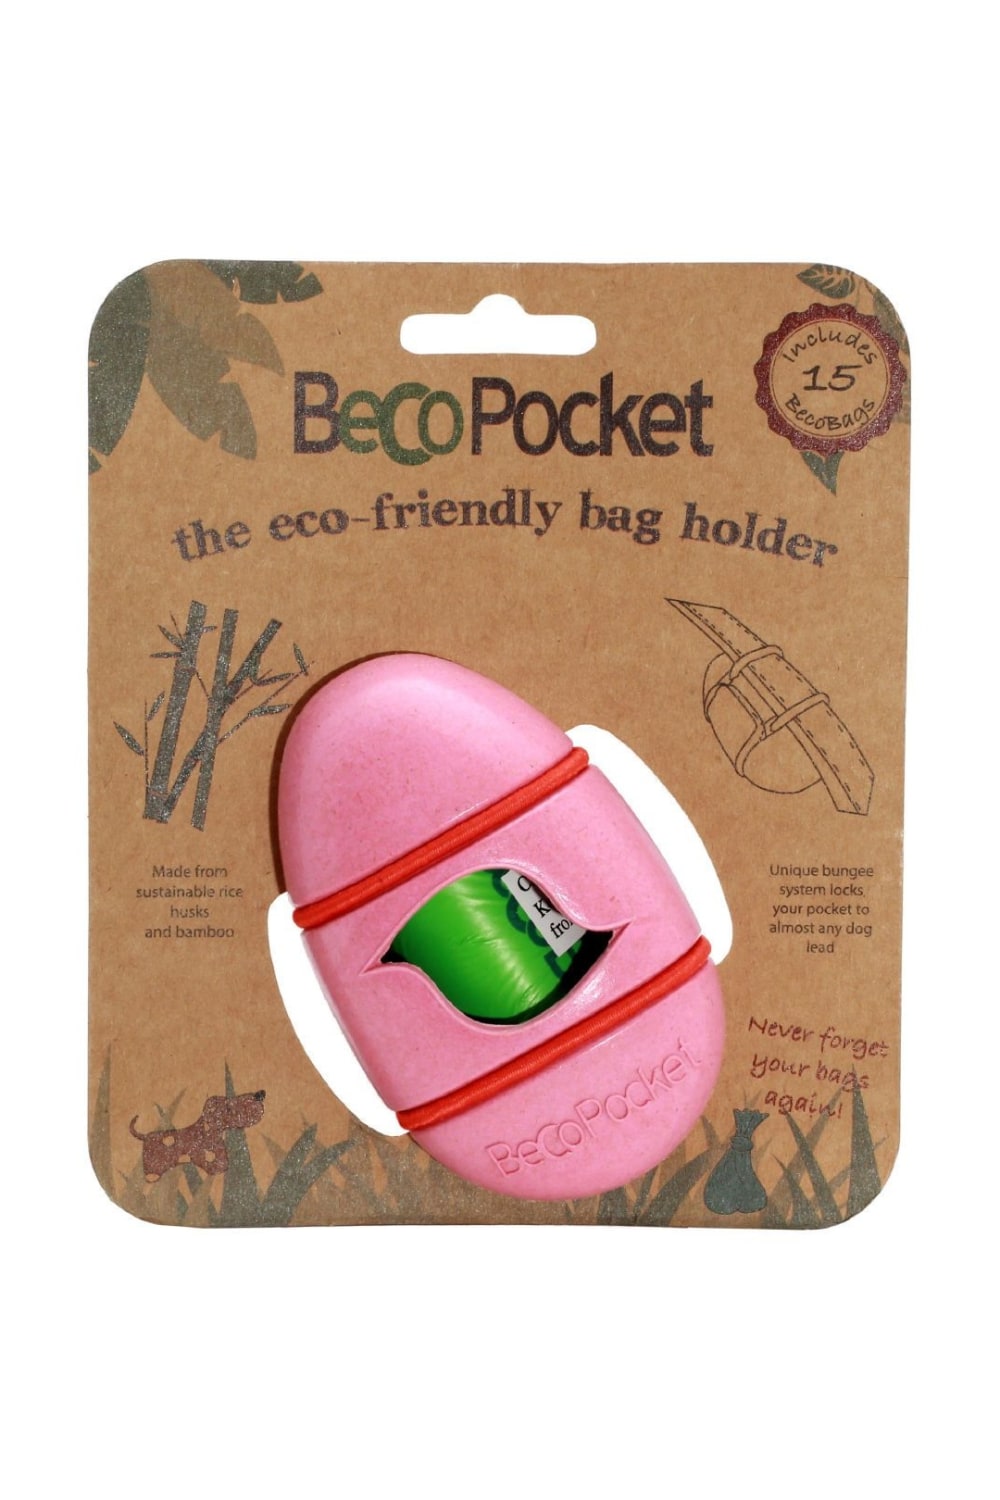 Beco Pets Plastic Dog Waste Bags Eco Holder (Pink) (15 bags)